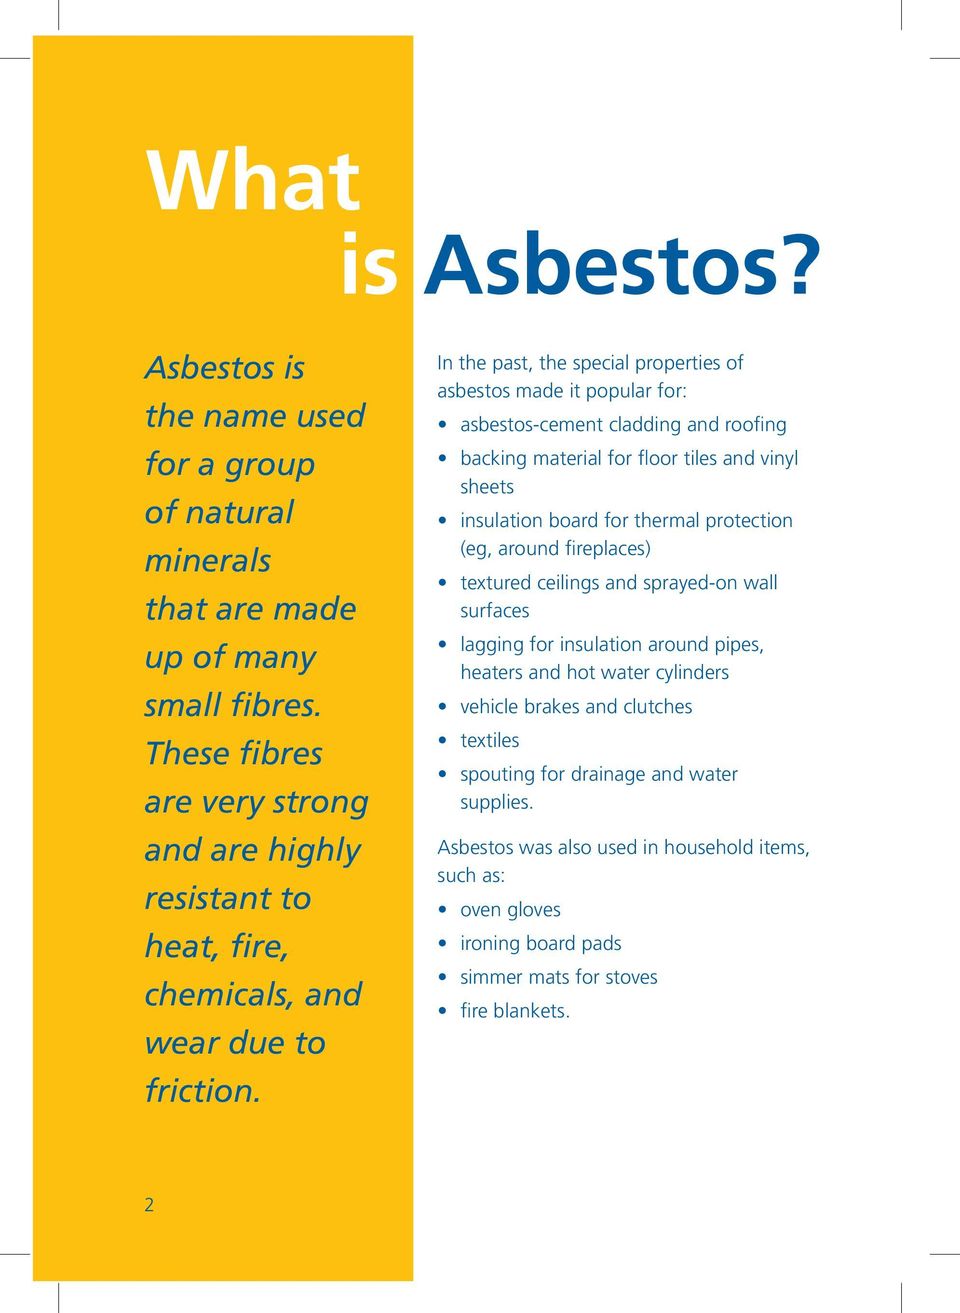 In the past, the special properties of asbestos made it popular for: asbestos-cement cladding and roofing backing material for floor tiles and vinyl sheets insulation board for thermal